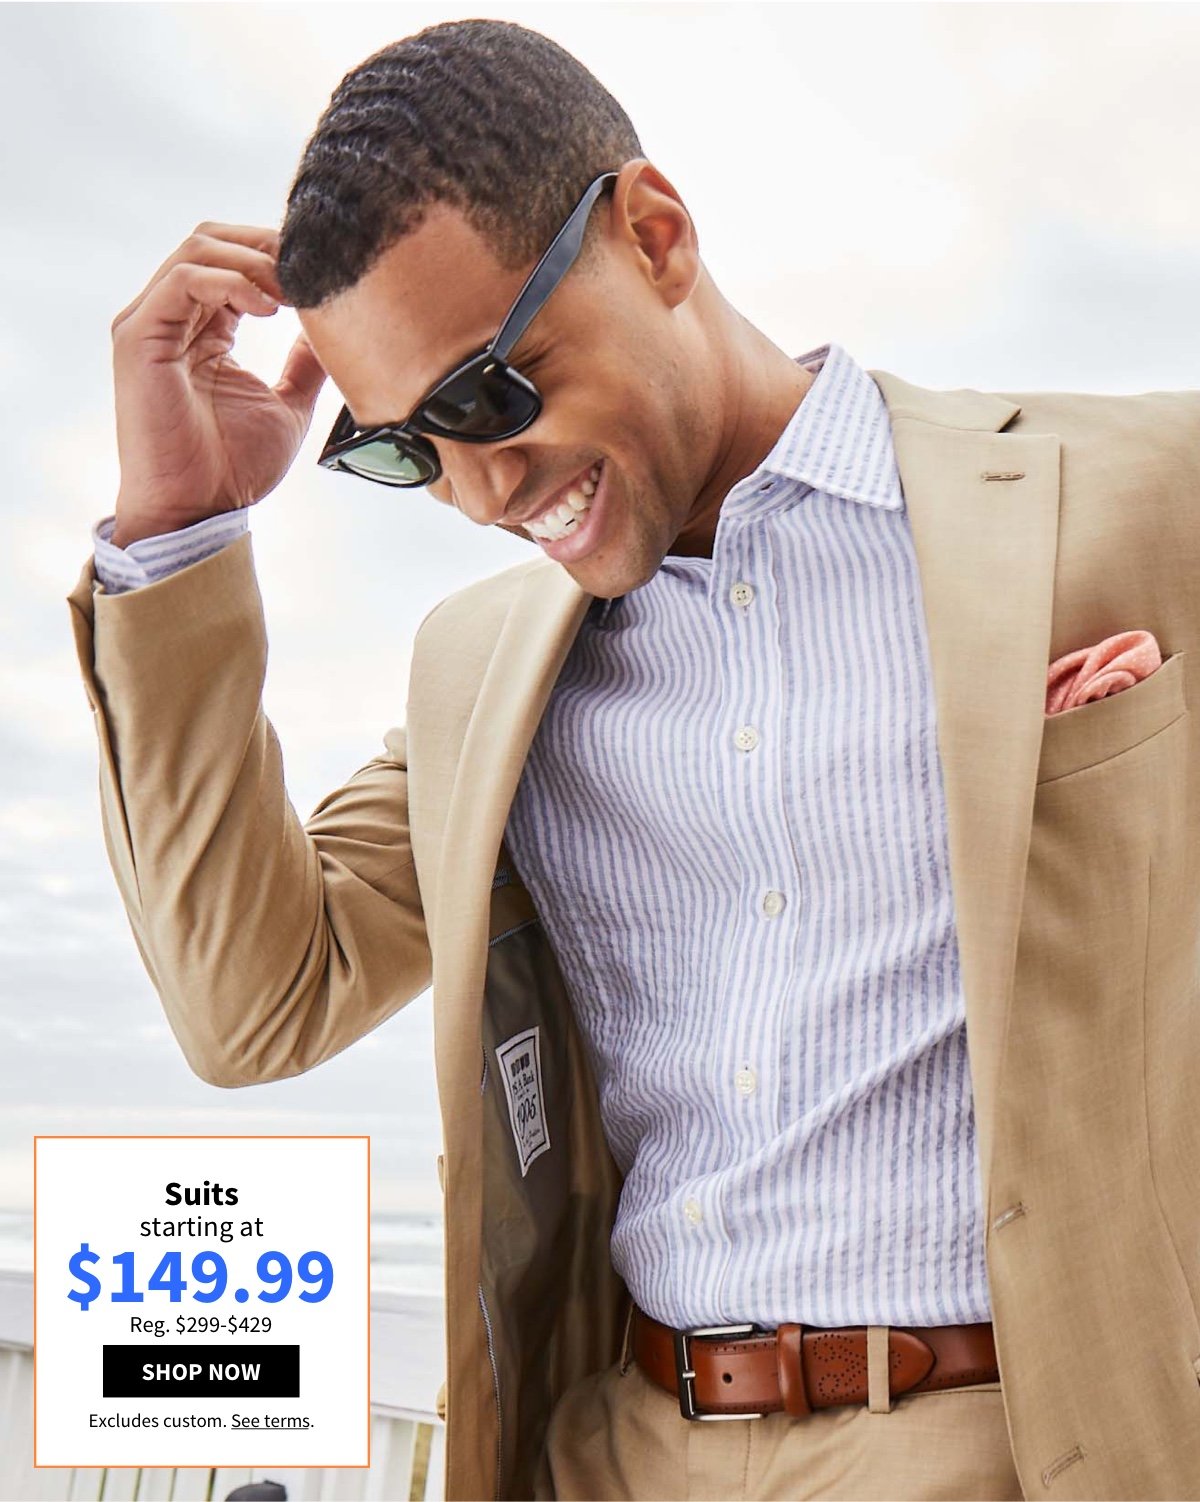 Suits starting at $149.99